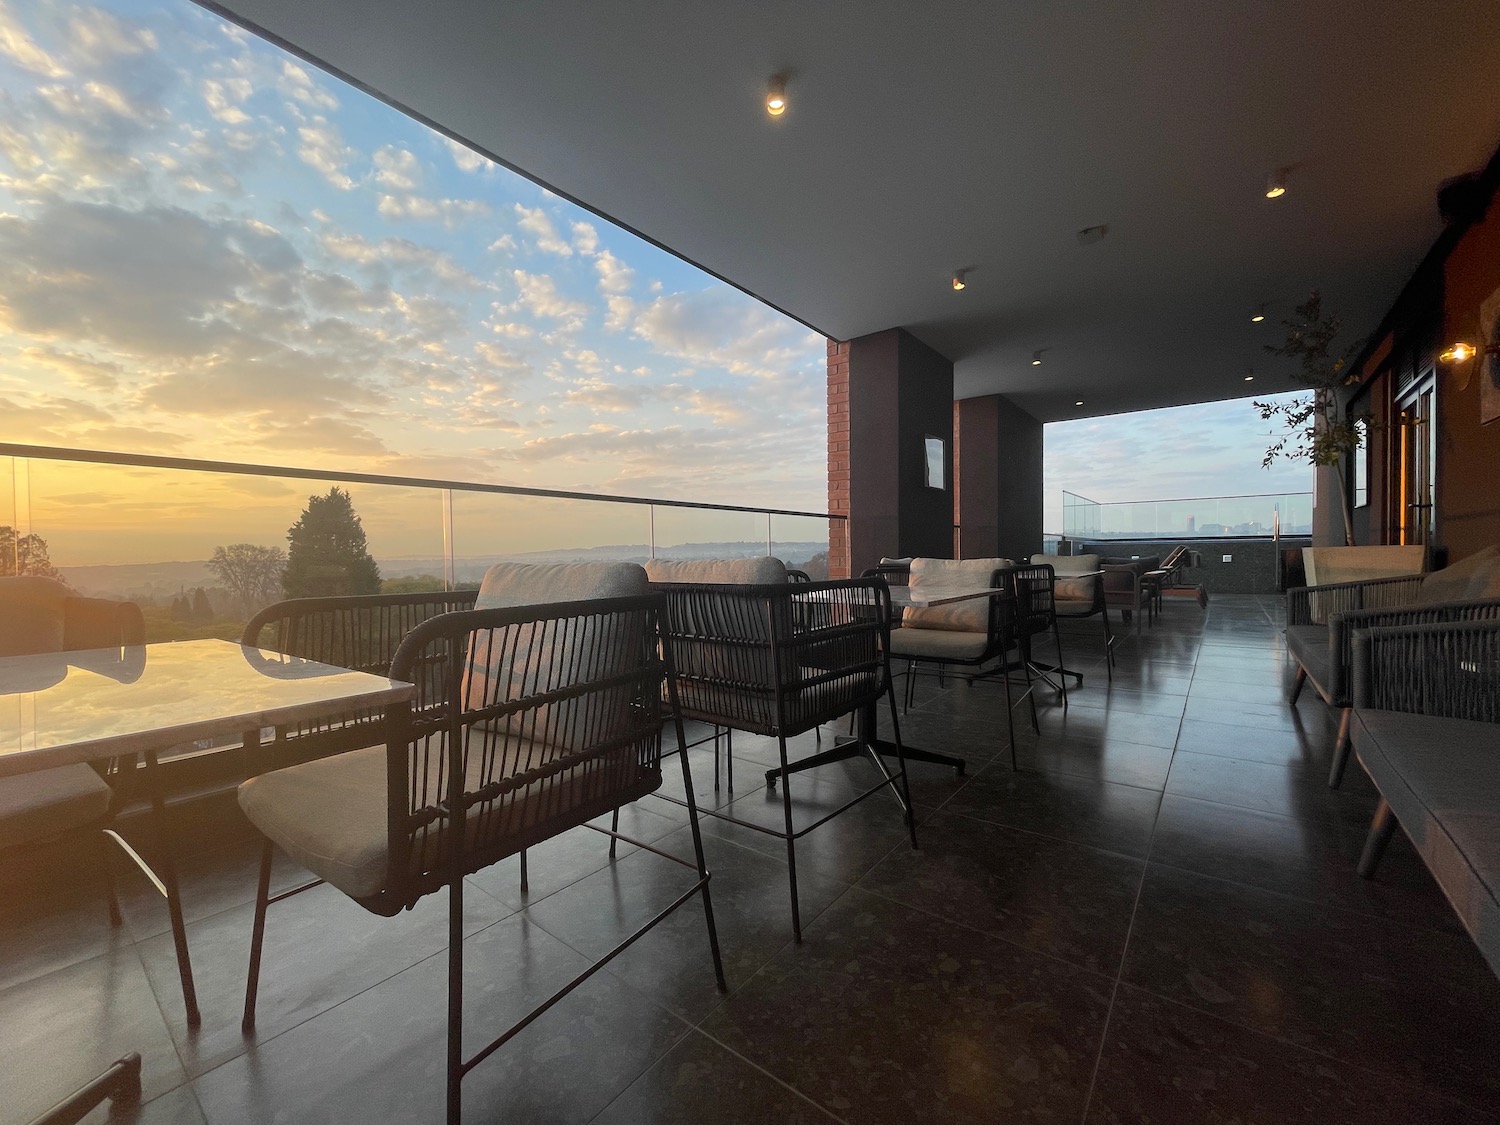 a patio with chairs and a view of the sunset